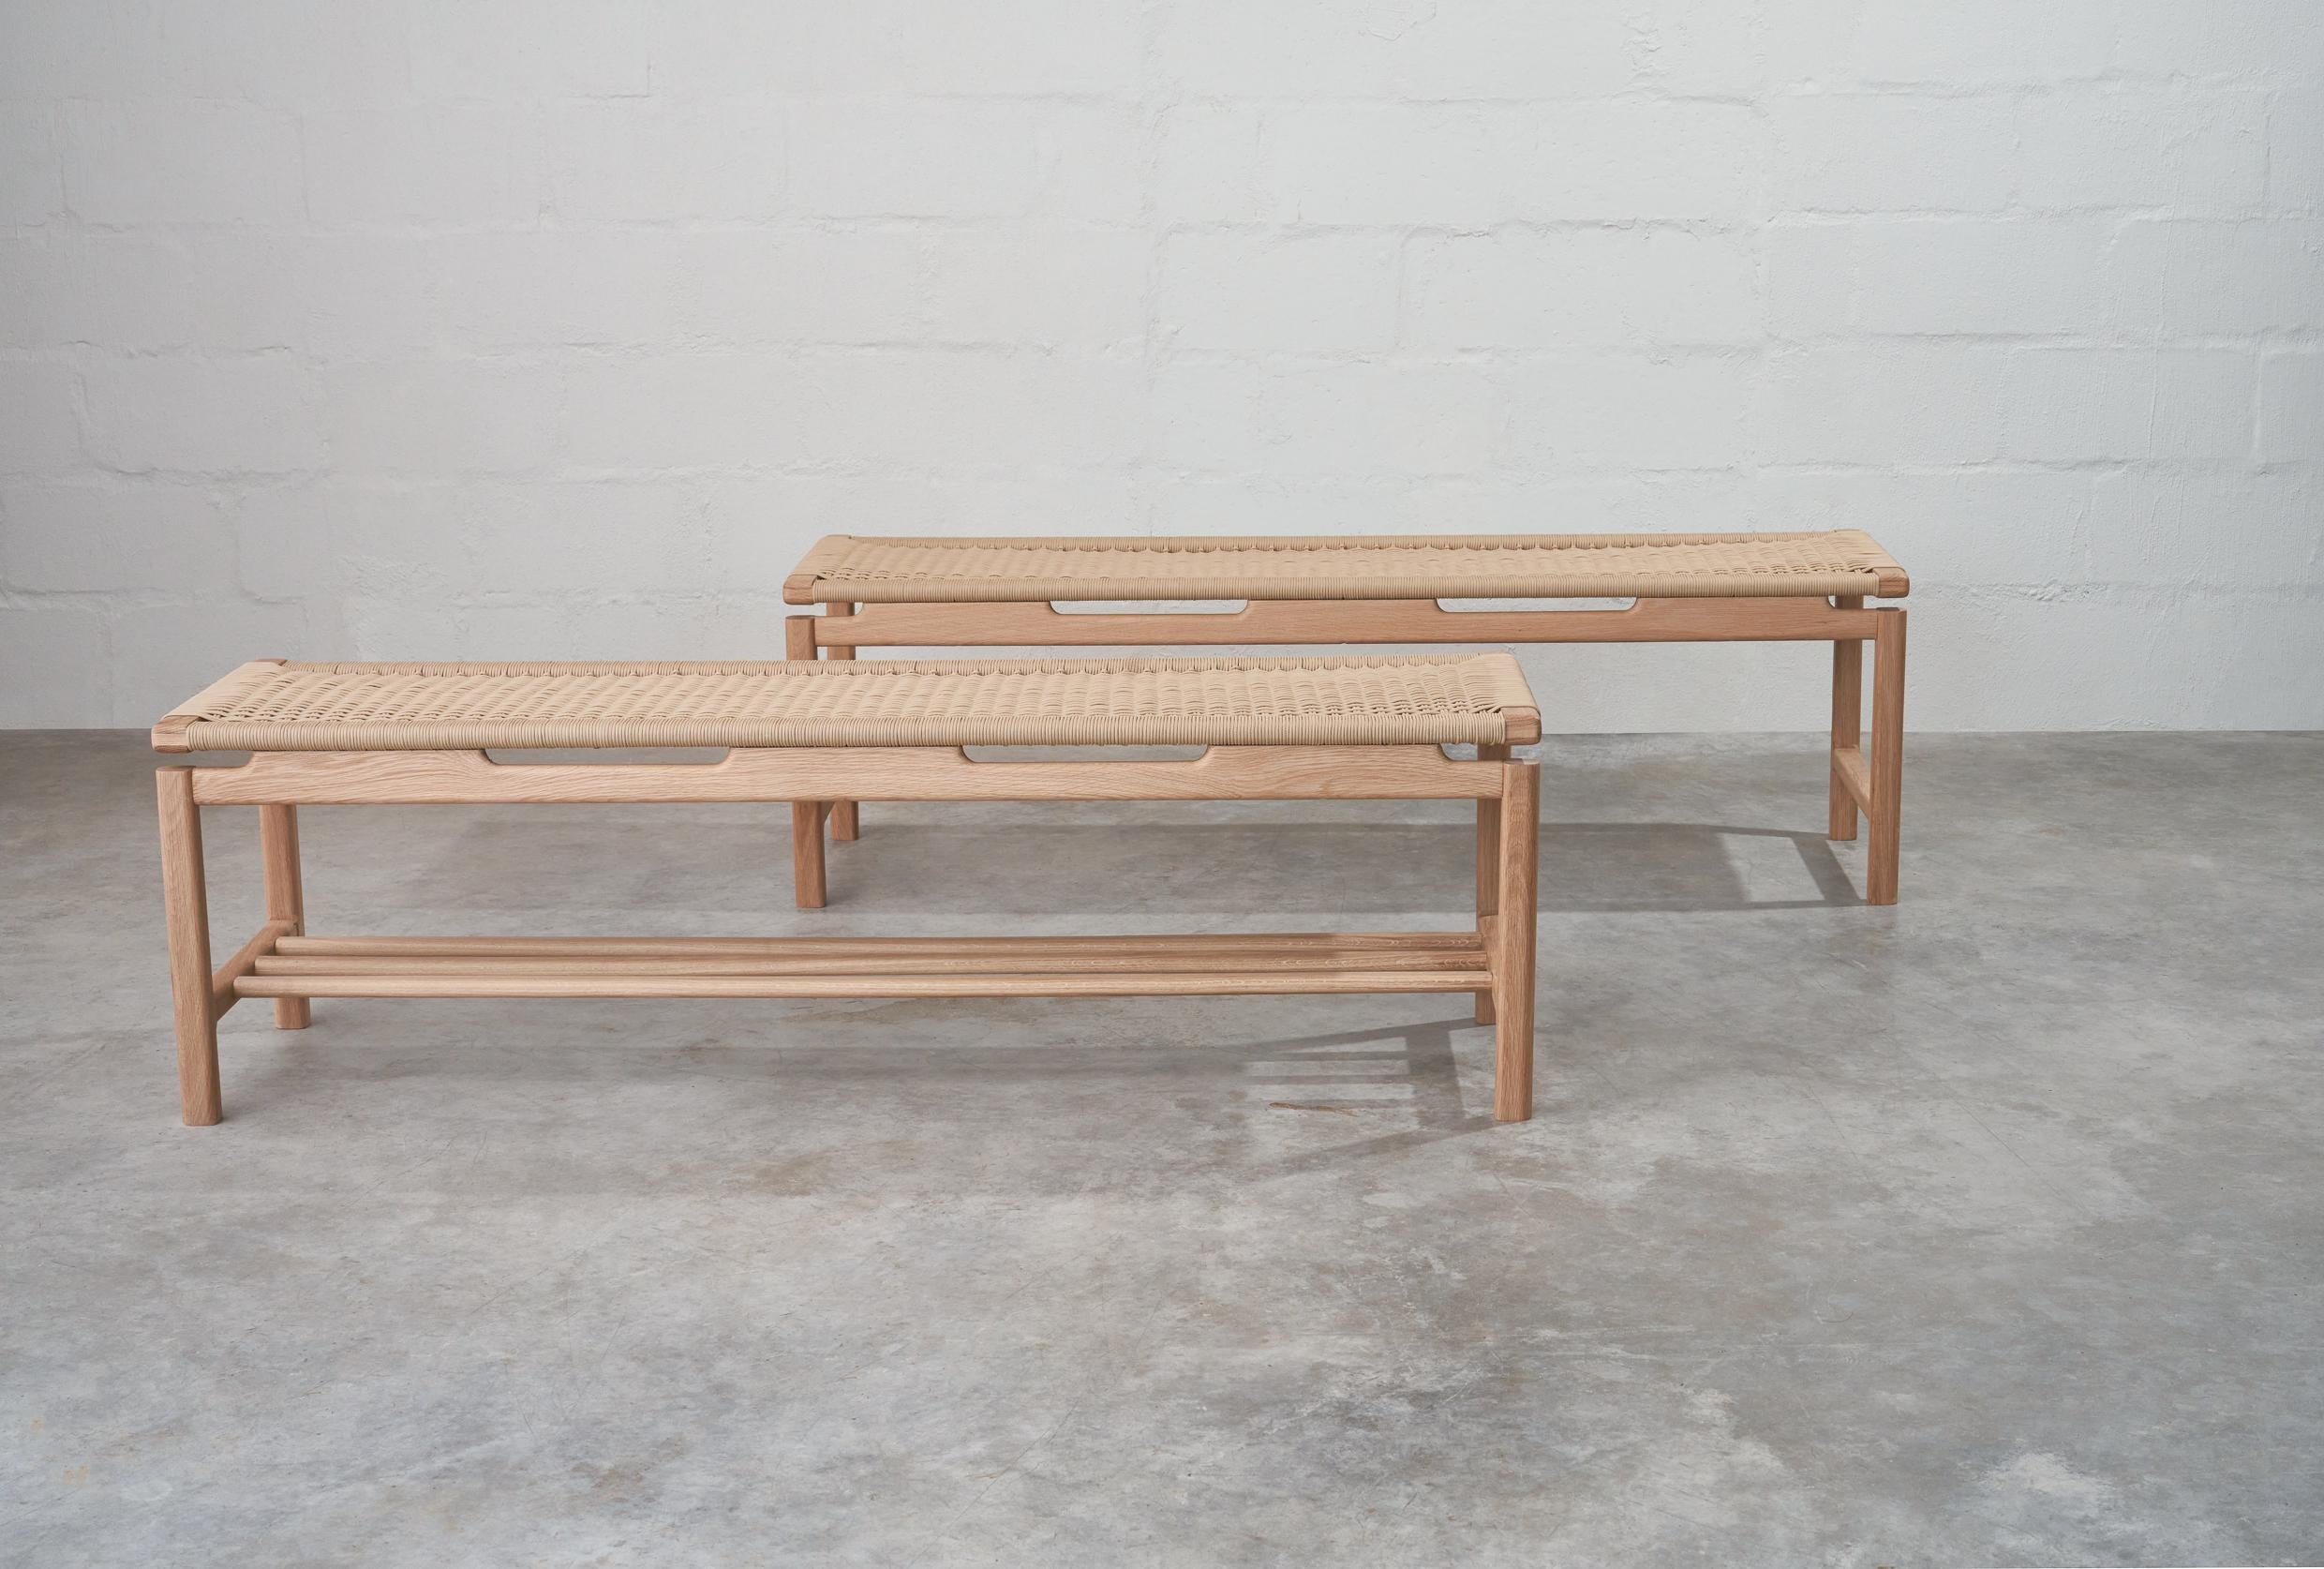 The woven bench has an intricate, detailed design, with beautifully rounded corners and exposed joinery. Made from solid white oak and hand woven the bench has a perfect balance between simplicity and craftsmanship.This versatile piece of furniture